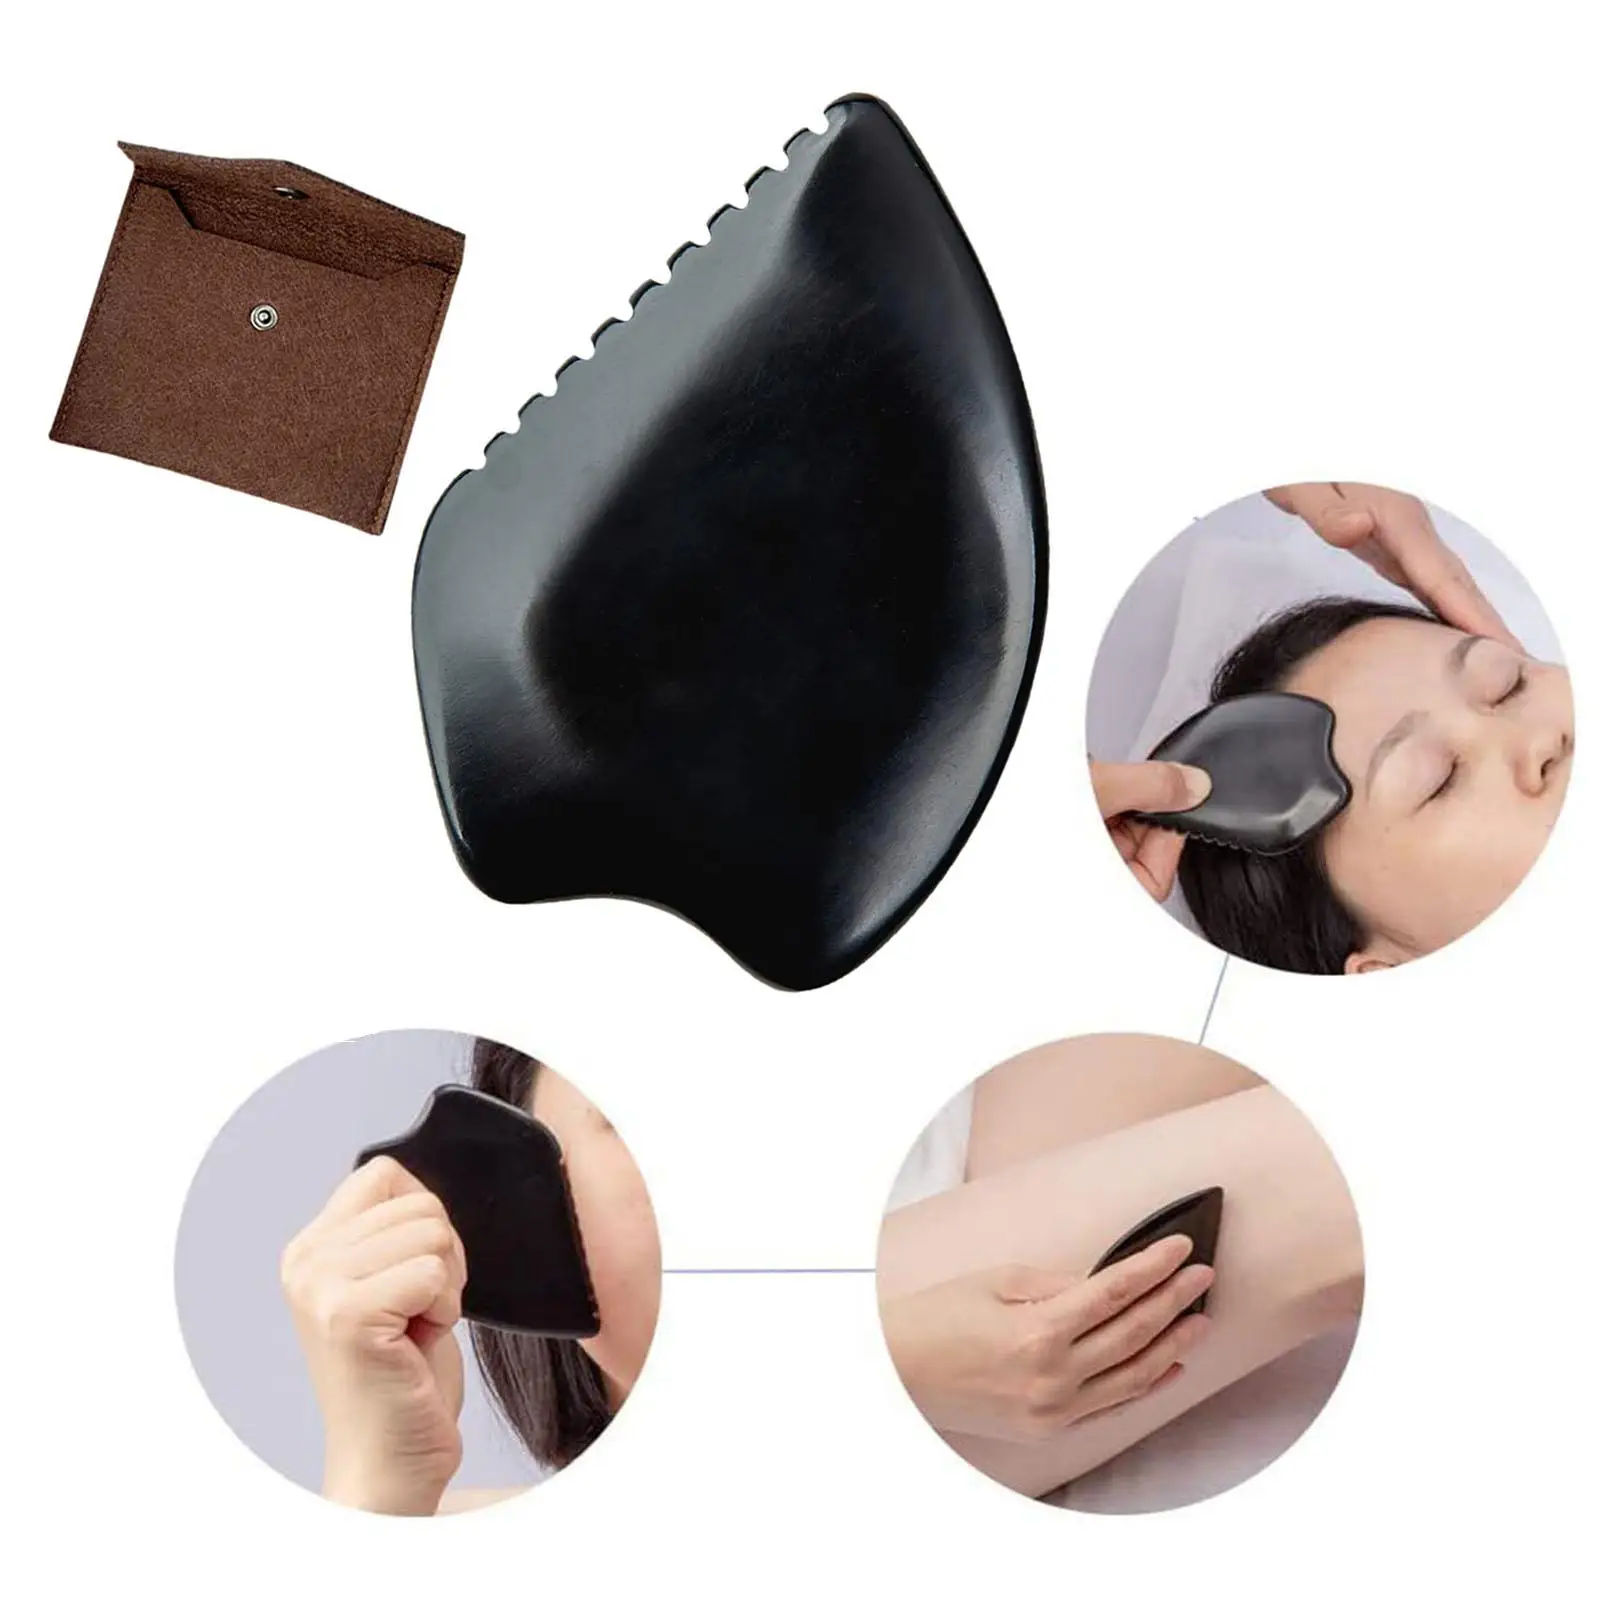 Scraping Board Bianstone Pain Treatment Relieve Muscle Tensions Massage Scraper Head Comb for Shoulders Feet Body Health SPA